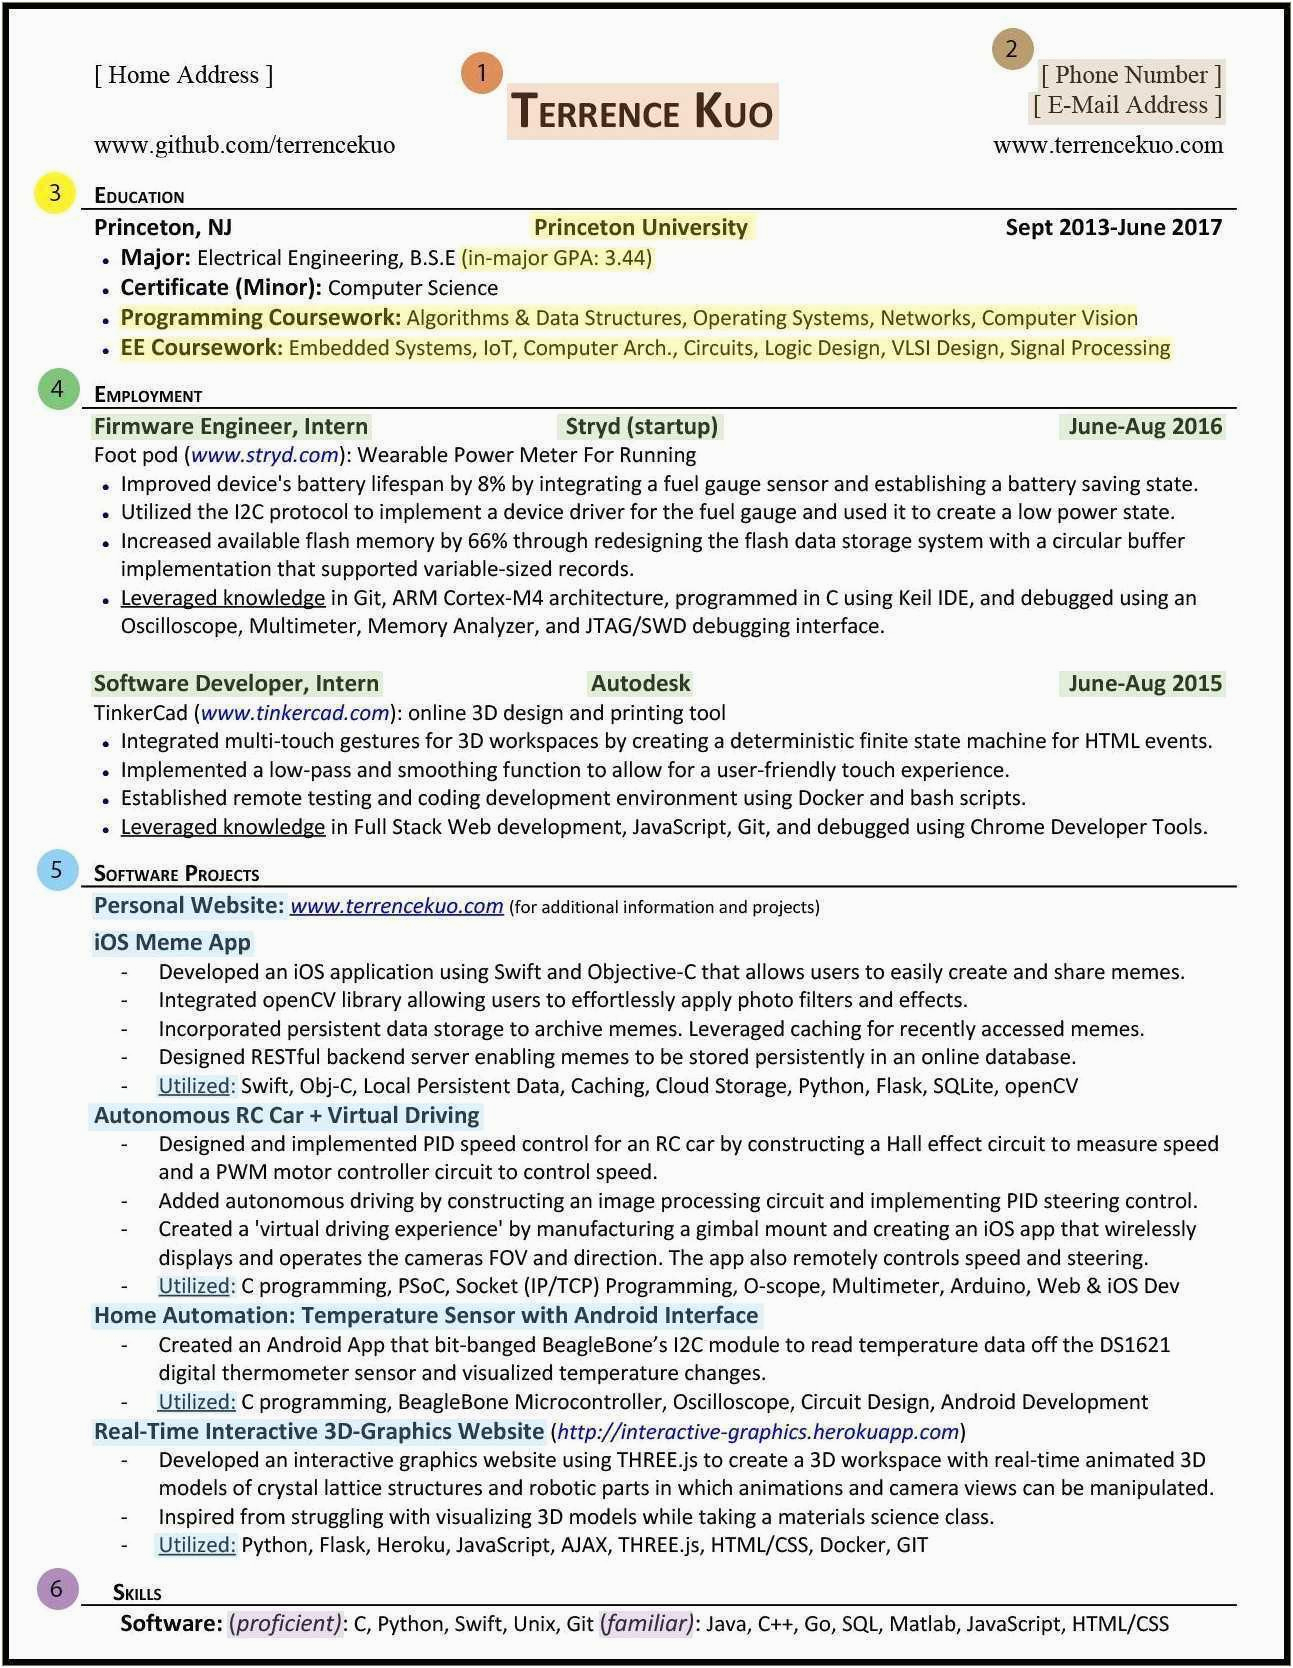 Alexaa and Dtaflow Voice Application Sample Resume Alexaa and Data Flow Resumes Sample Resume Gallery